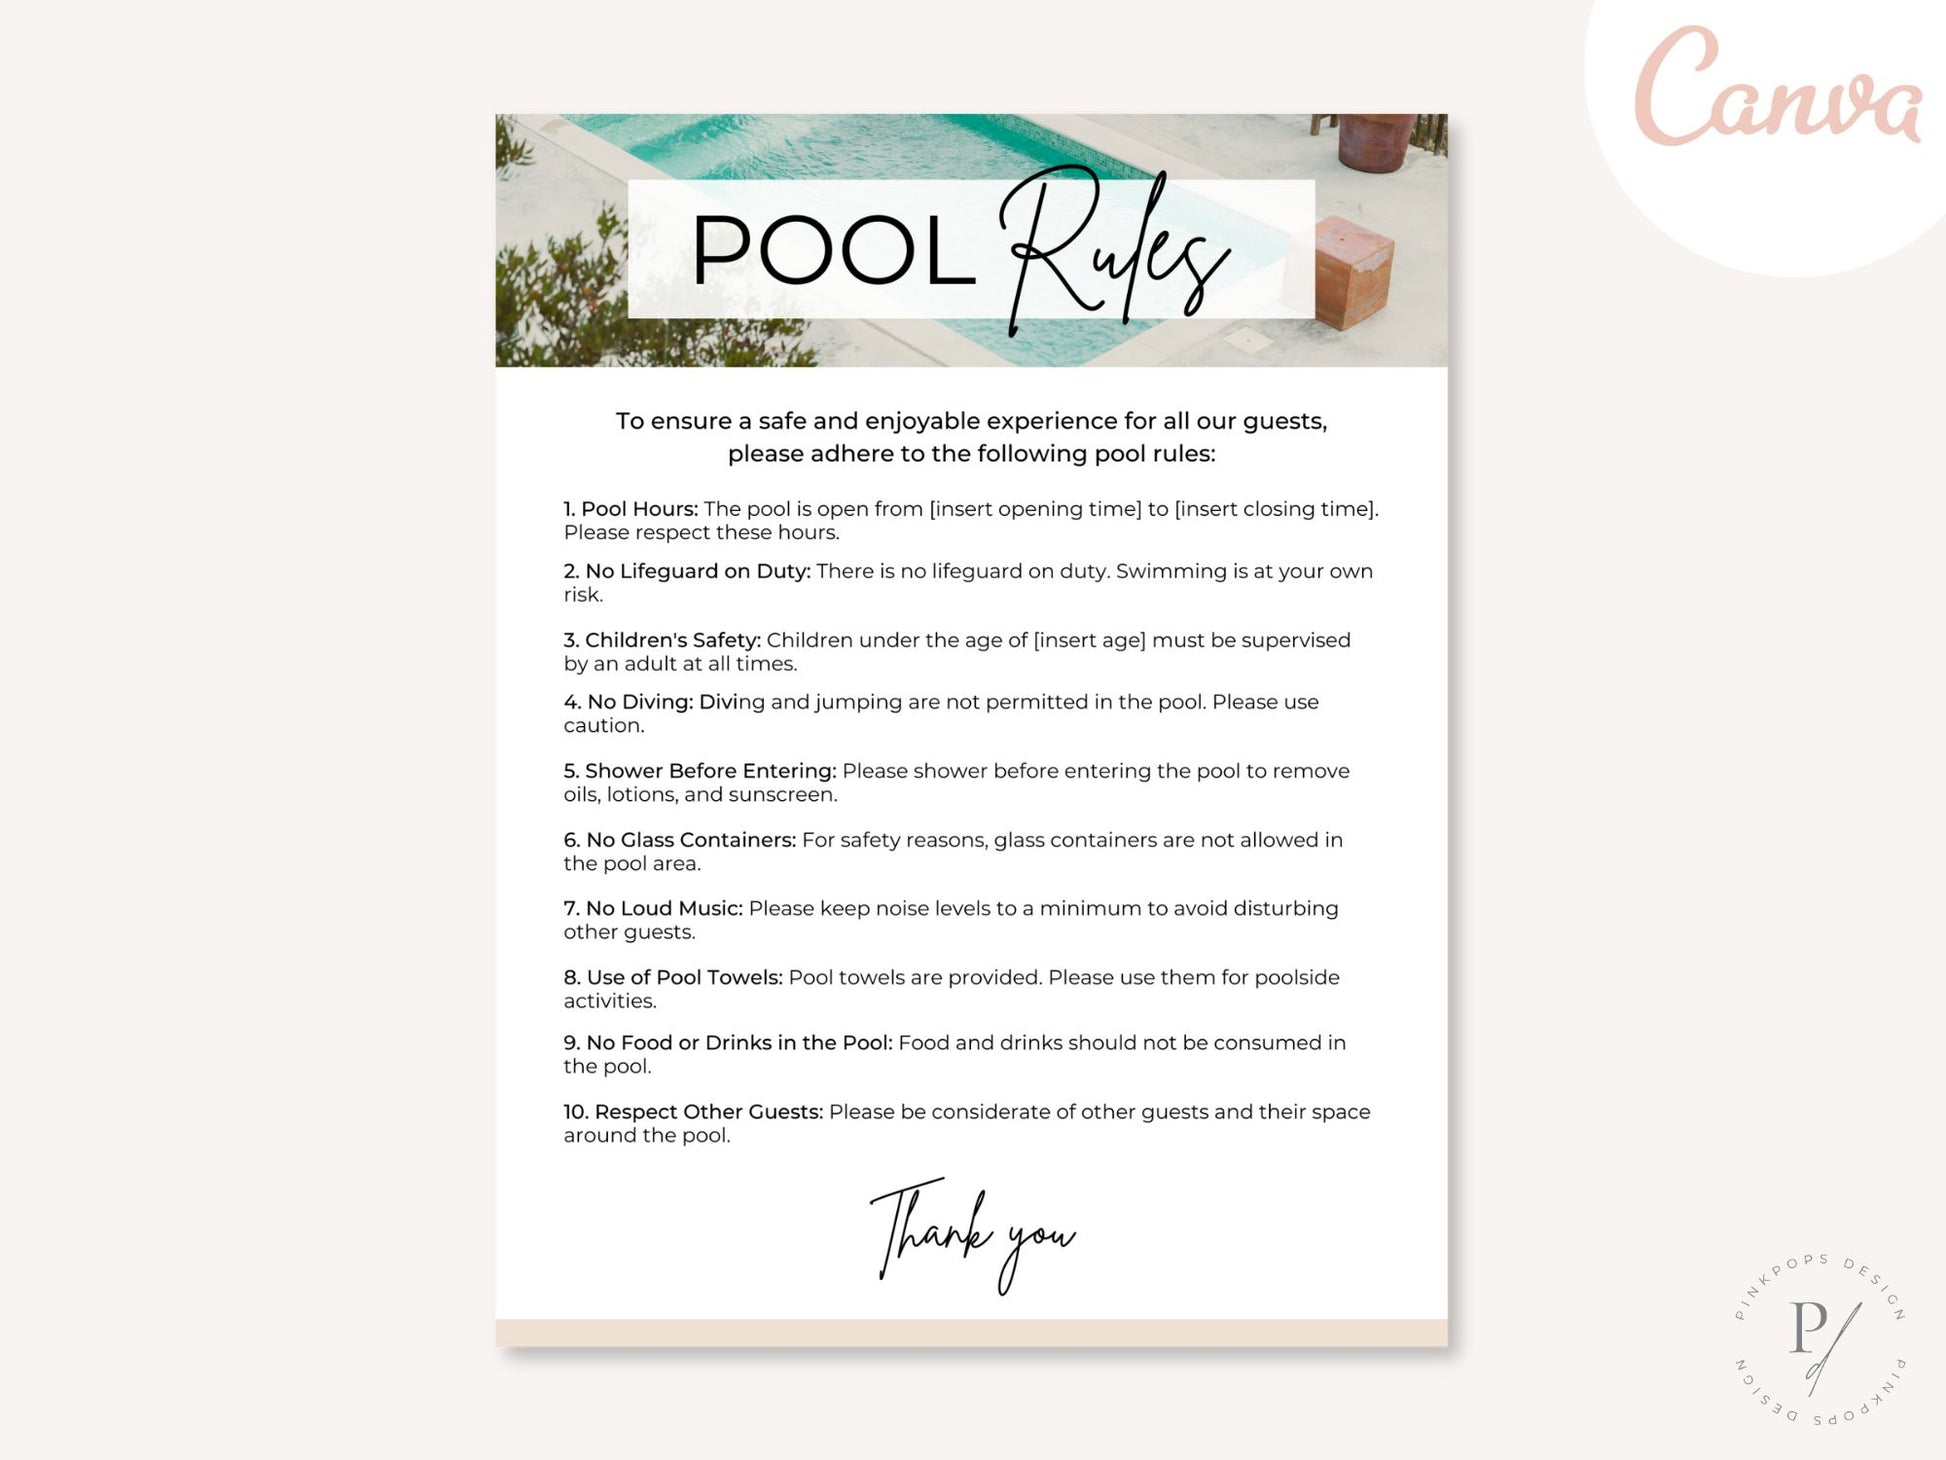 Pool Rules Airbnb Sign - Clear and visually appealing template for vacation rental pool guidelines.